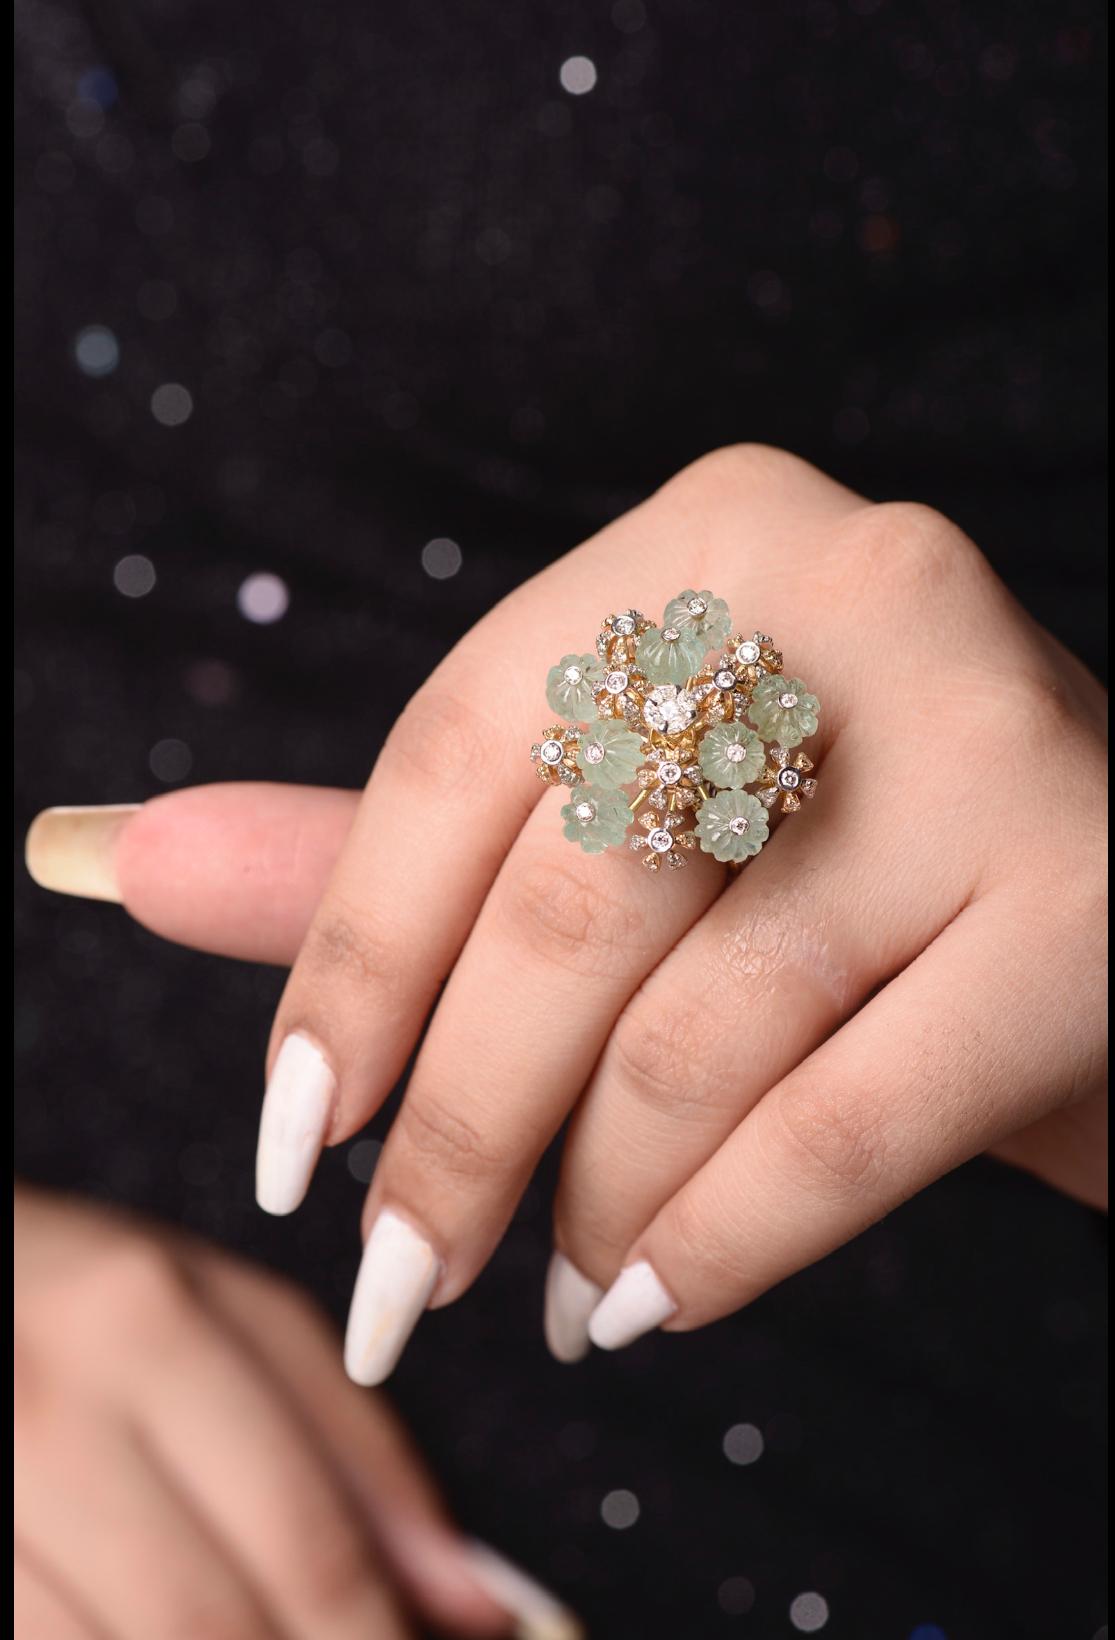 This ring is of  Magnificent design and is made with a combination of diamonds , Emerald melons and high quality Russian emeralds.